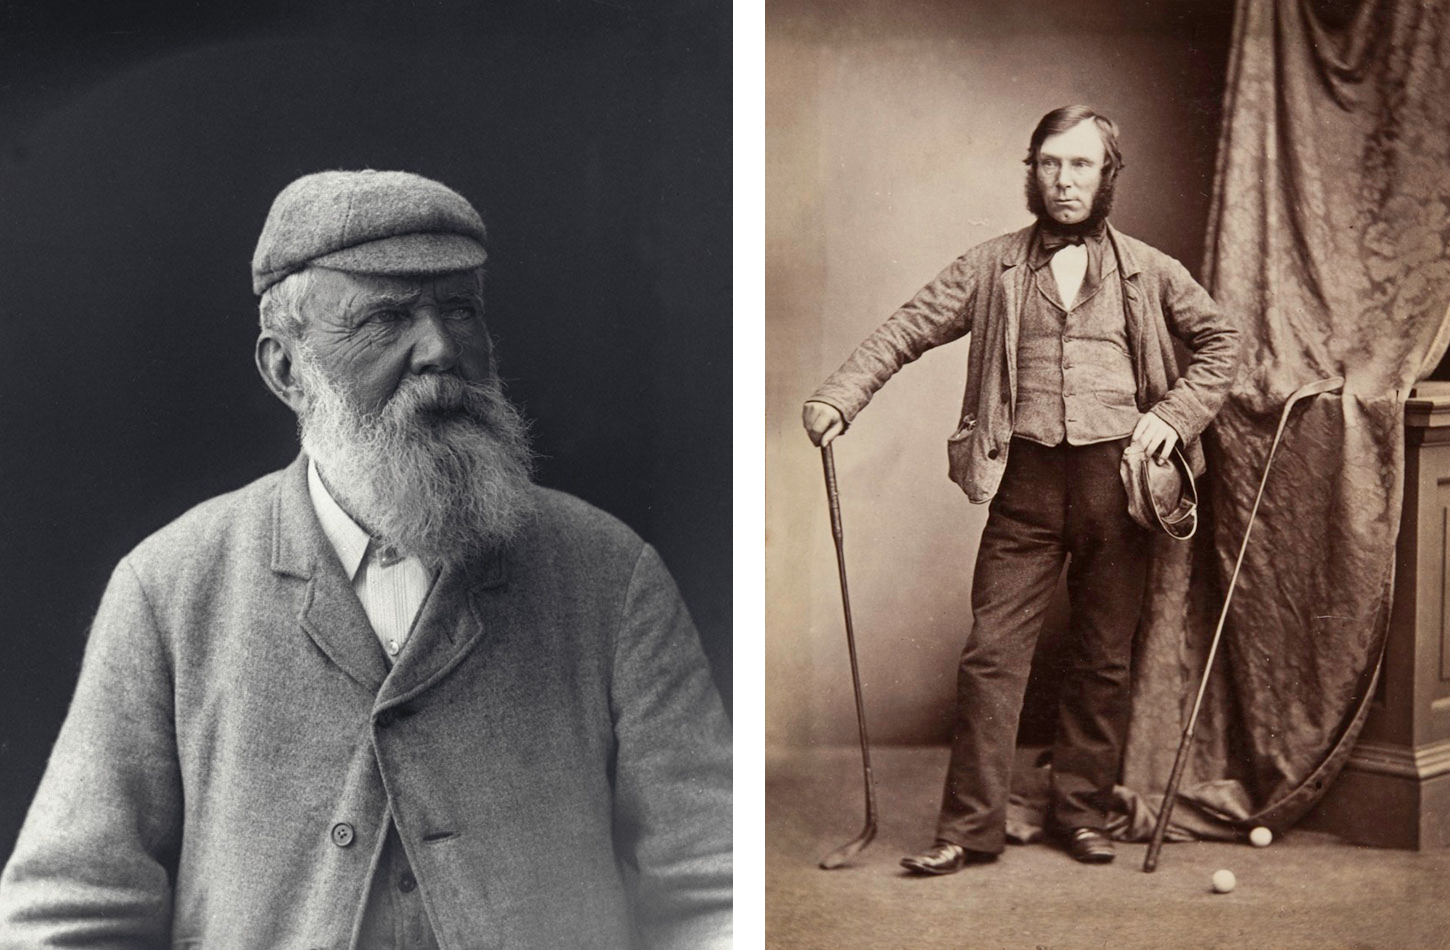 Left: Gelatin dry plate negative (glass plate) of Old Tom Morris, by George M. Cowie, 1900 (GMC-F-182). Right: Print of Allan Robertson, by Thomas Rodger, 1850 (ALB-10-49).